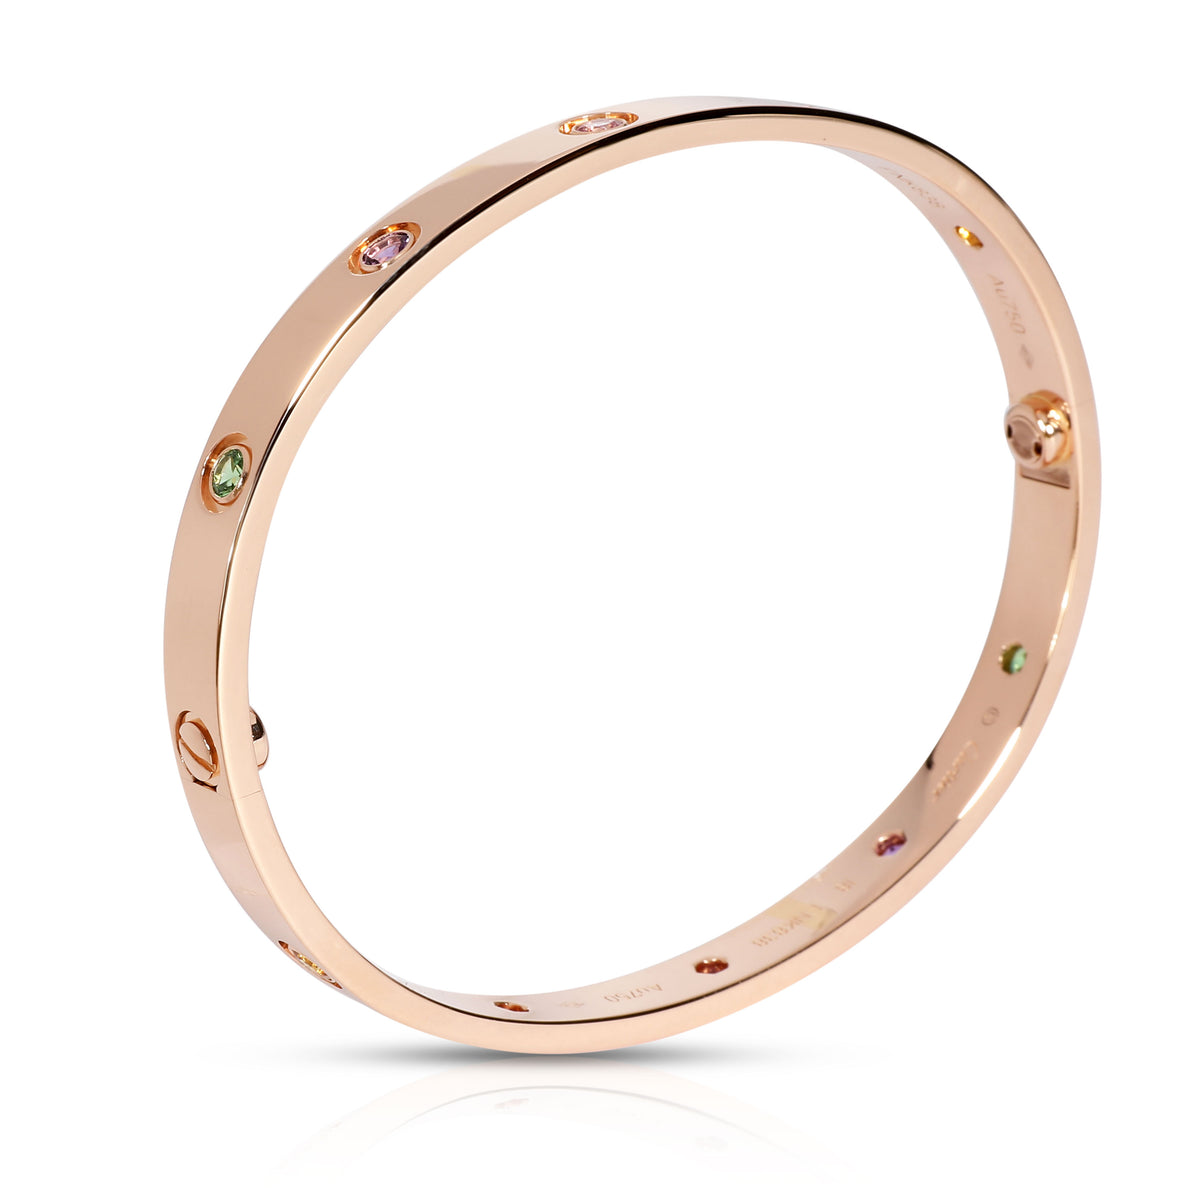 Cartier Love Bracelet with Sapphires in 18K Rose Gold